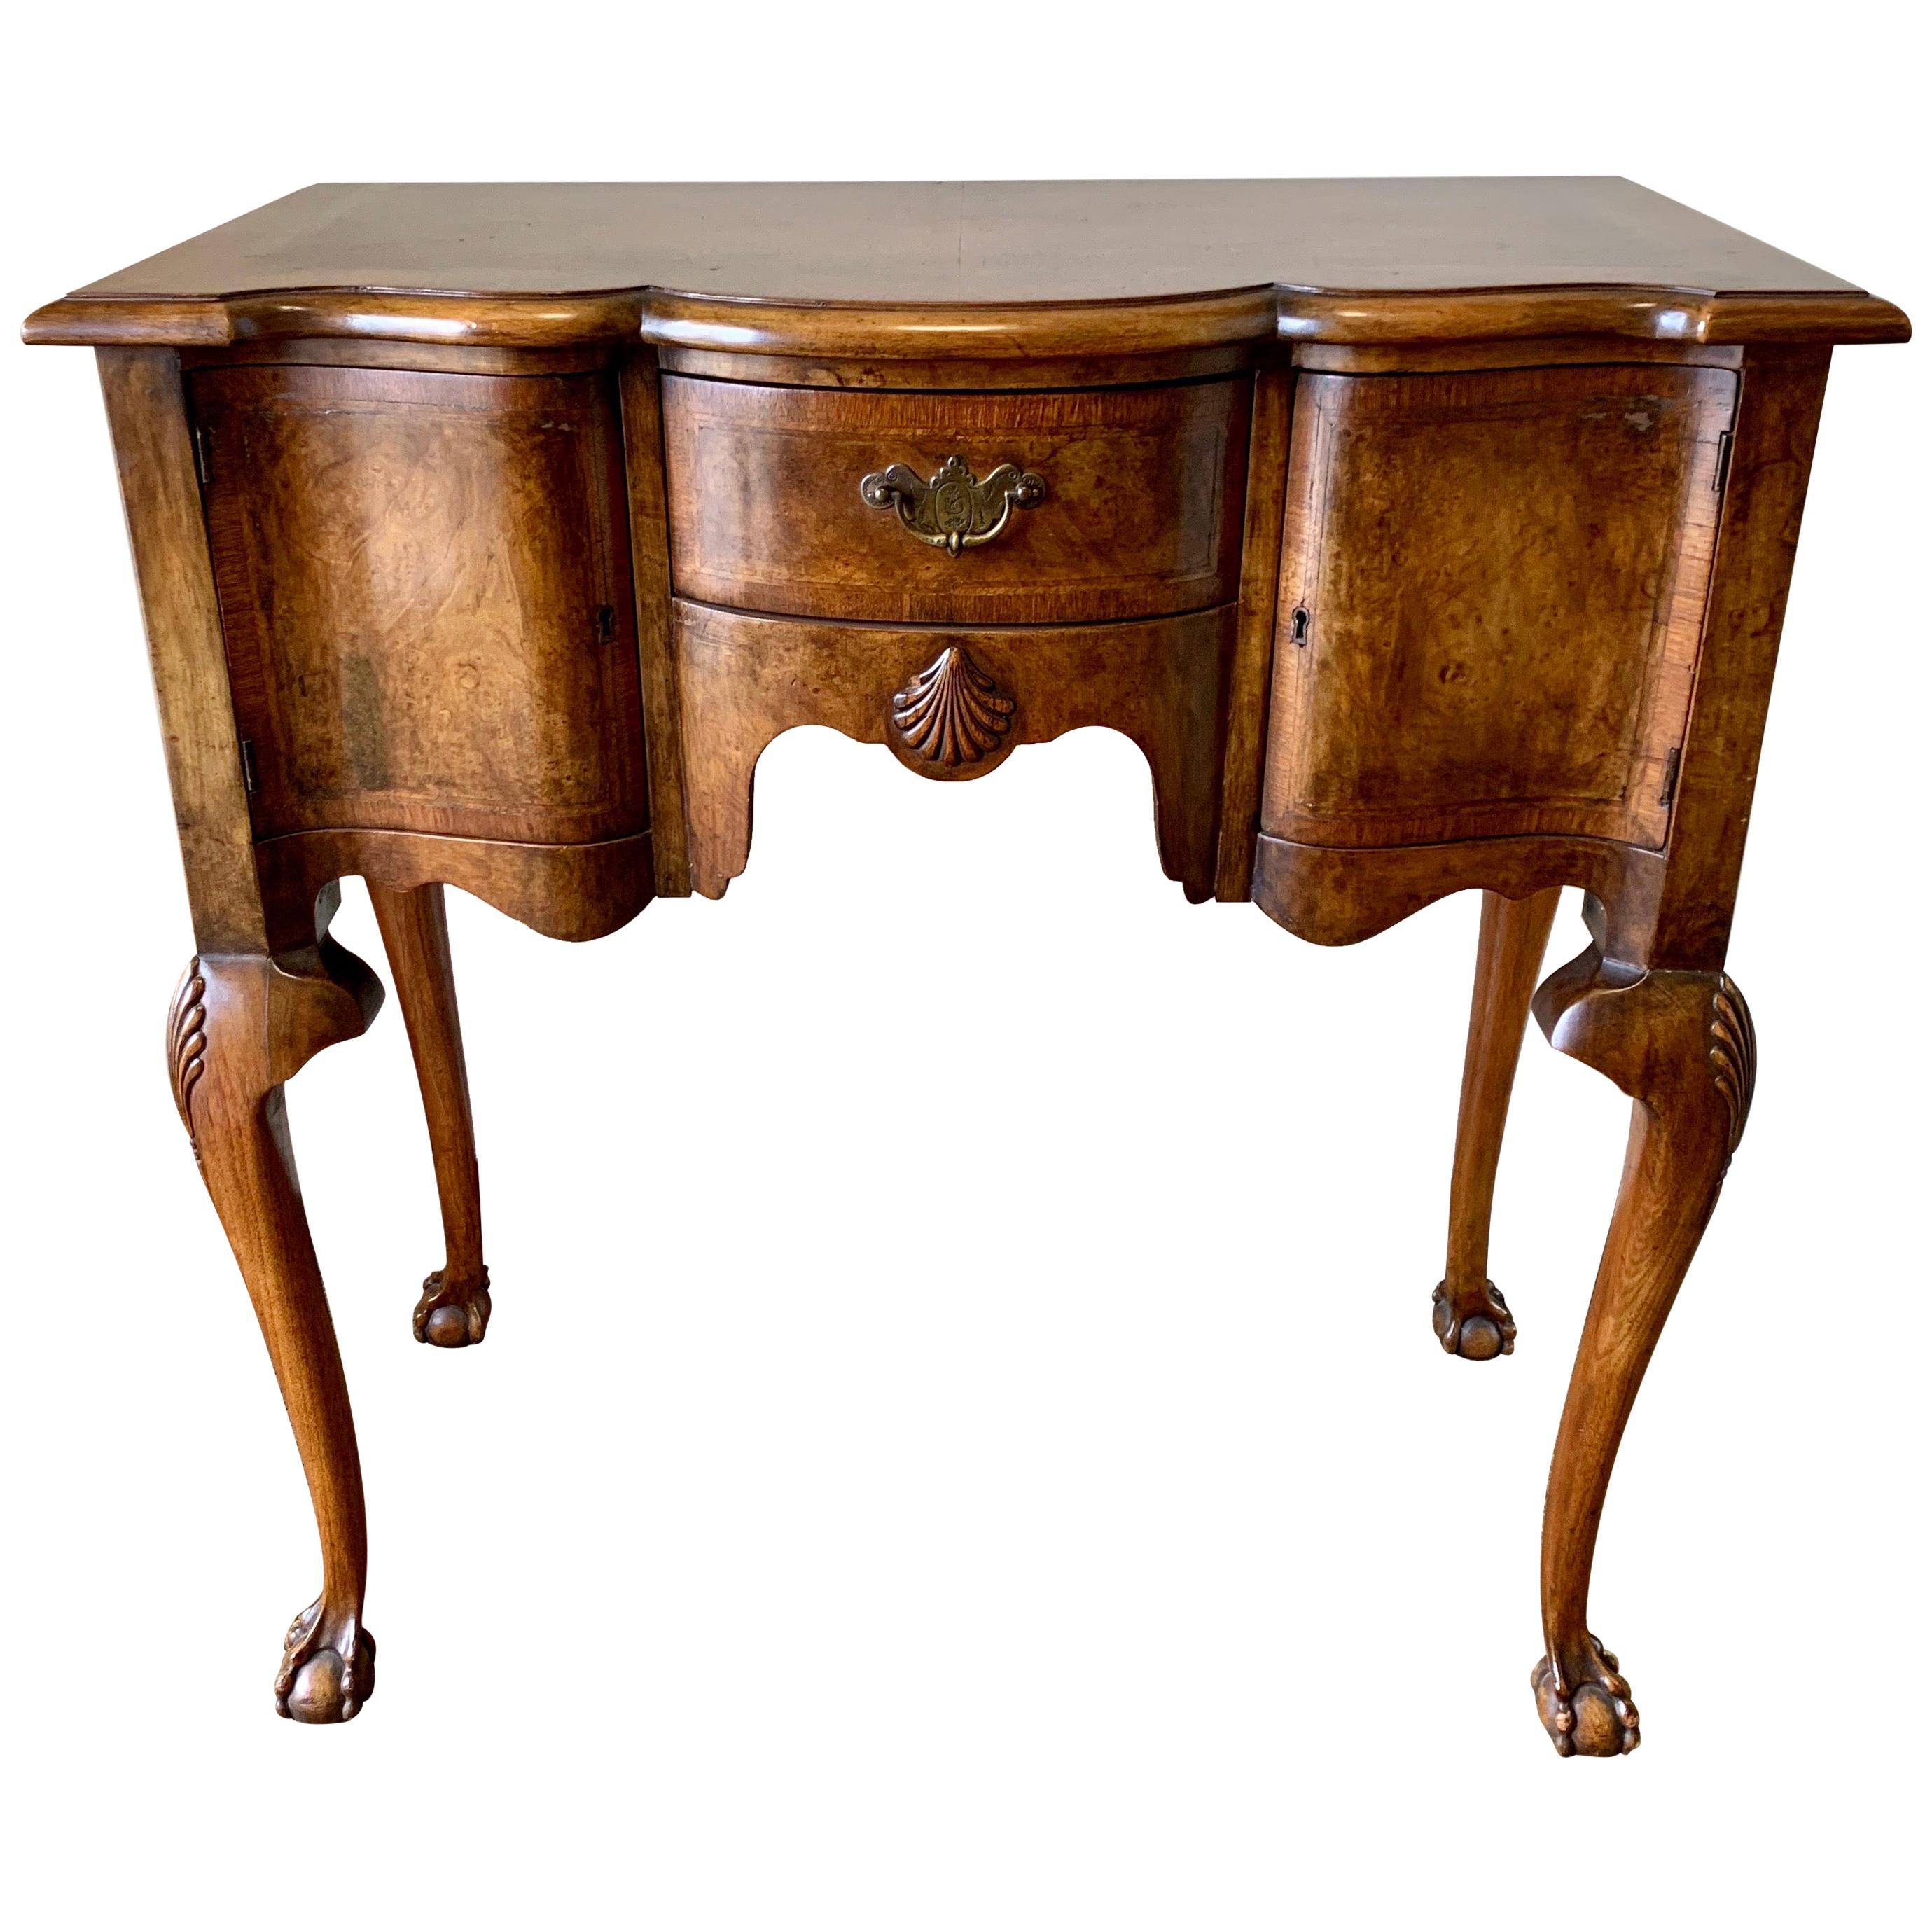 Carved Burled Walnut Ball and Claw Console Table